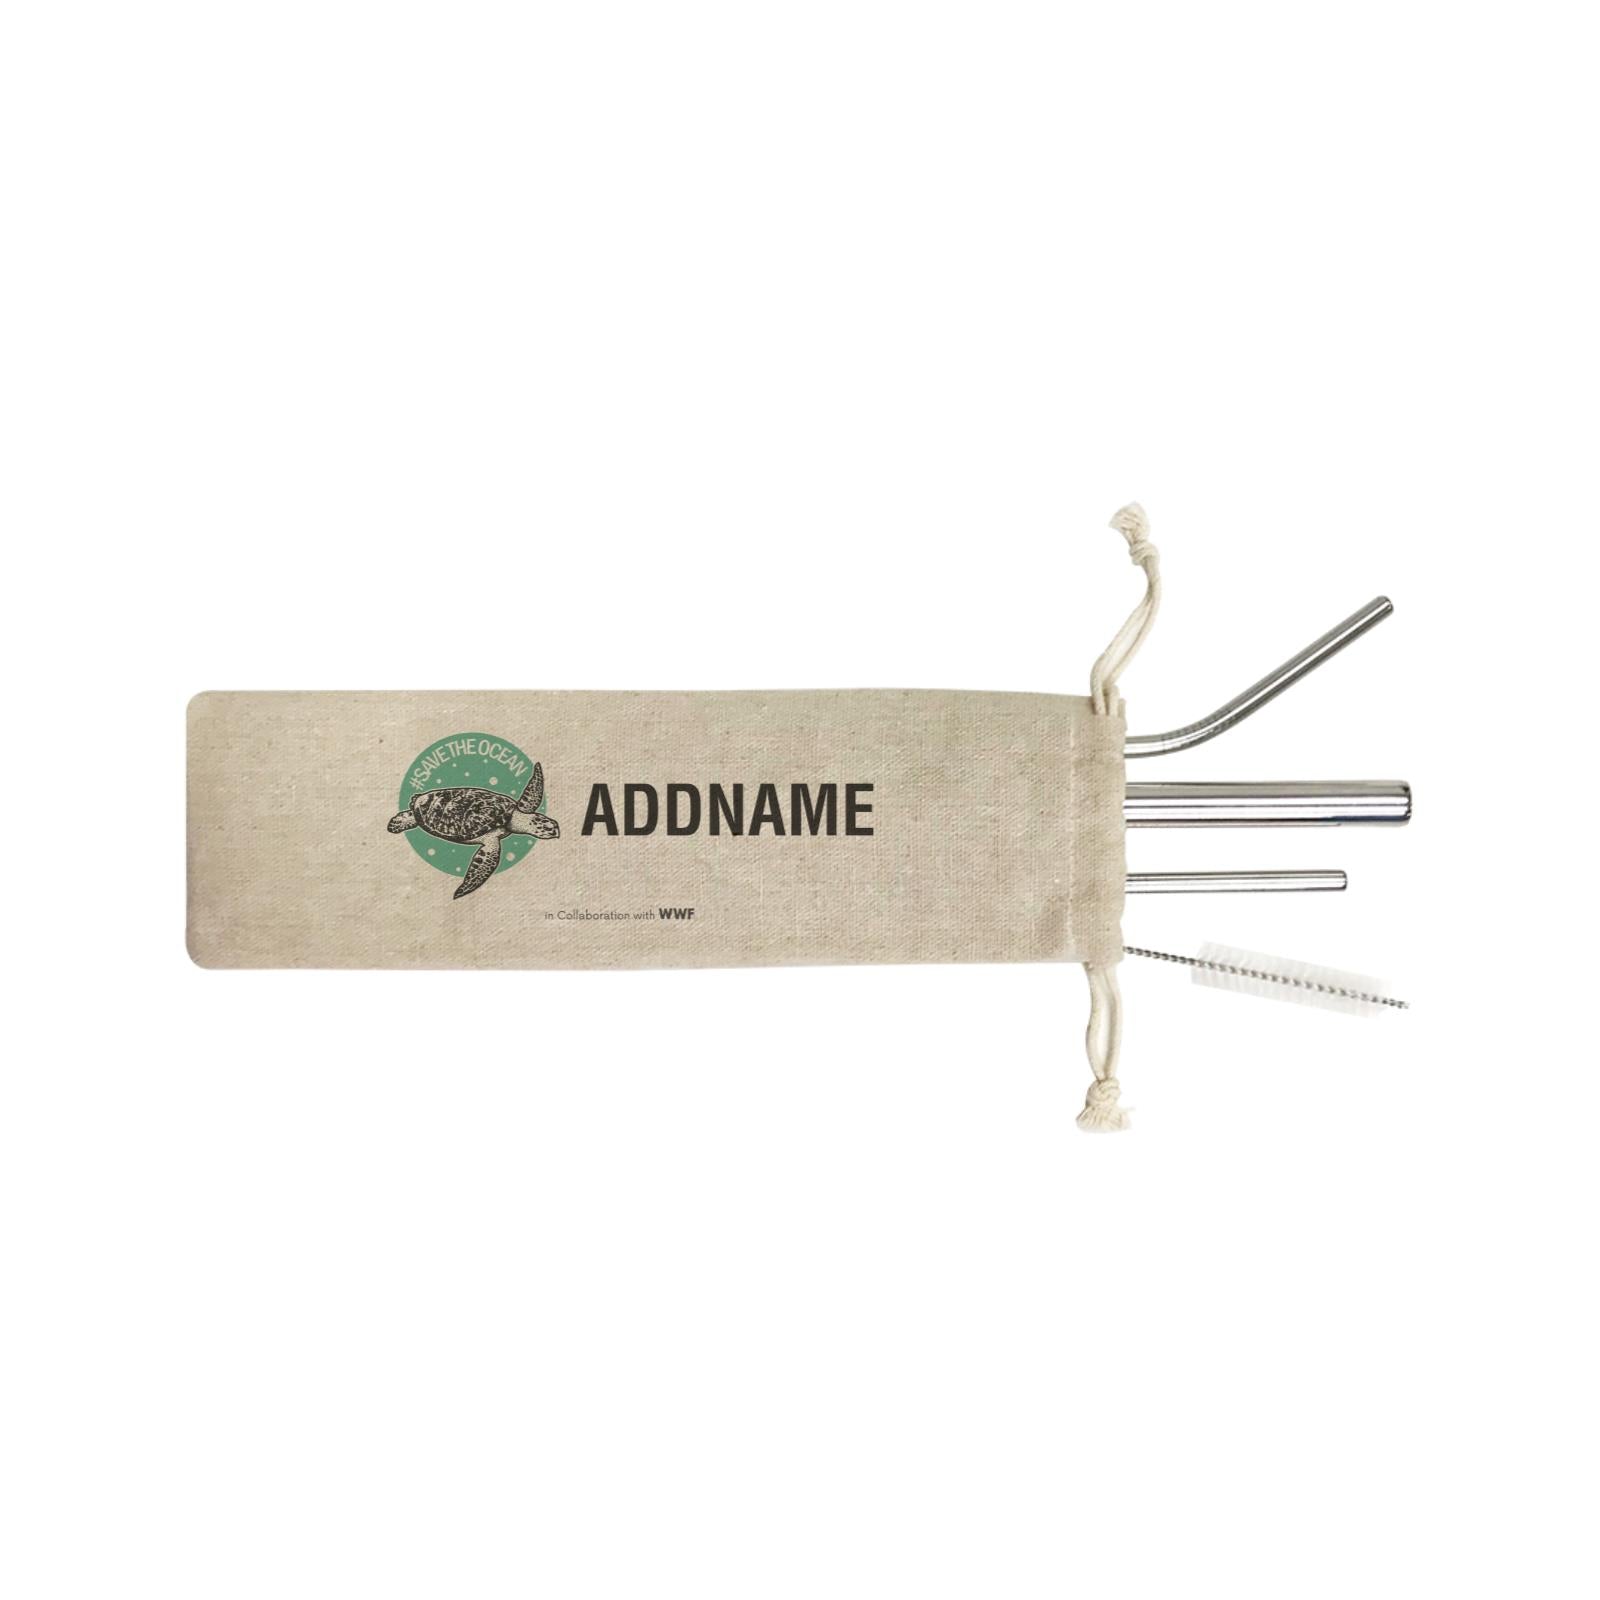 Hashtag Save the Ocean with Turtle Addname SB 4-In-1 Stainless Steel Straw Set in Satchel